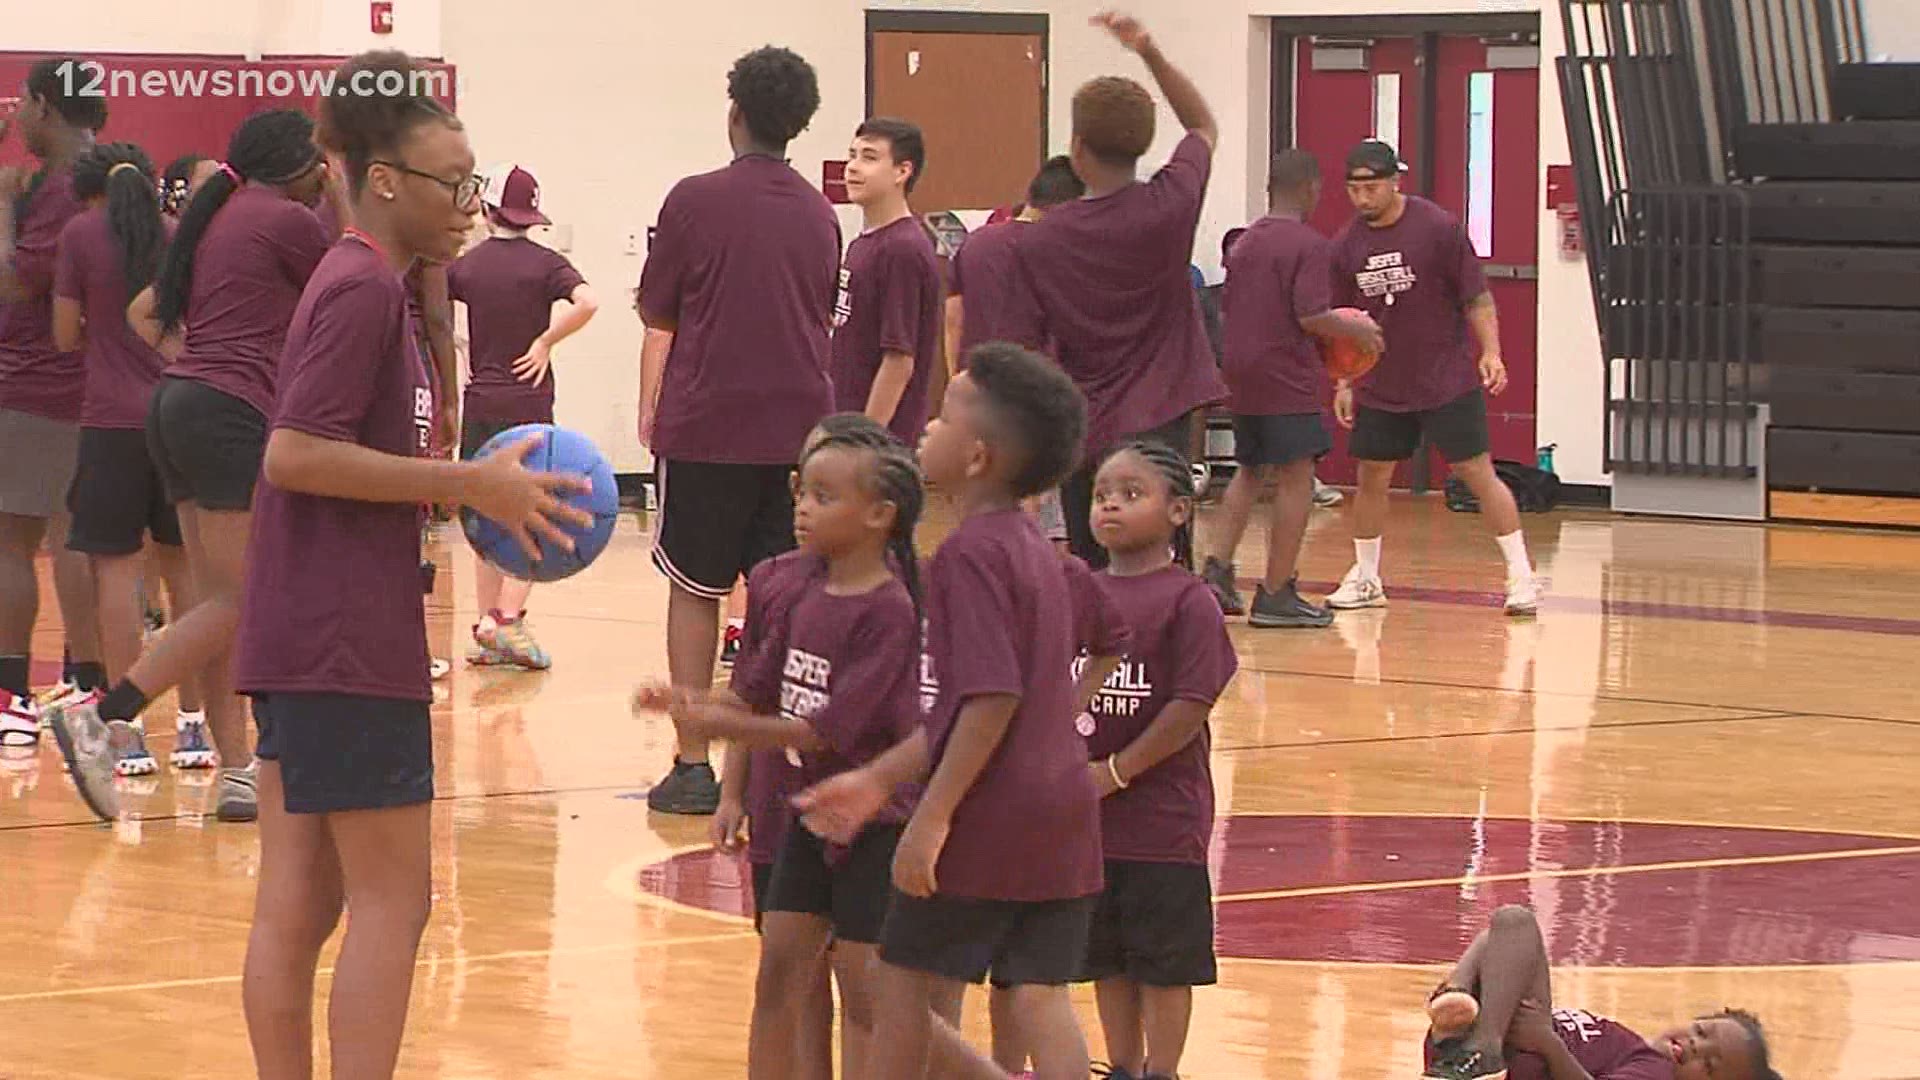 Over seventy kids participated in this week's Jasper Basketball Elite Camp